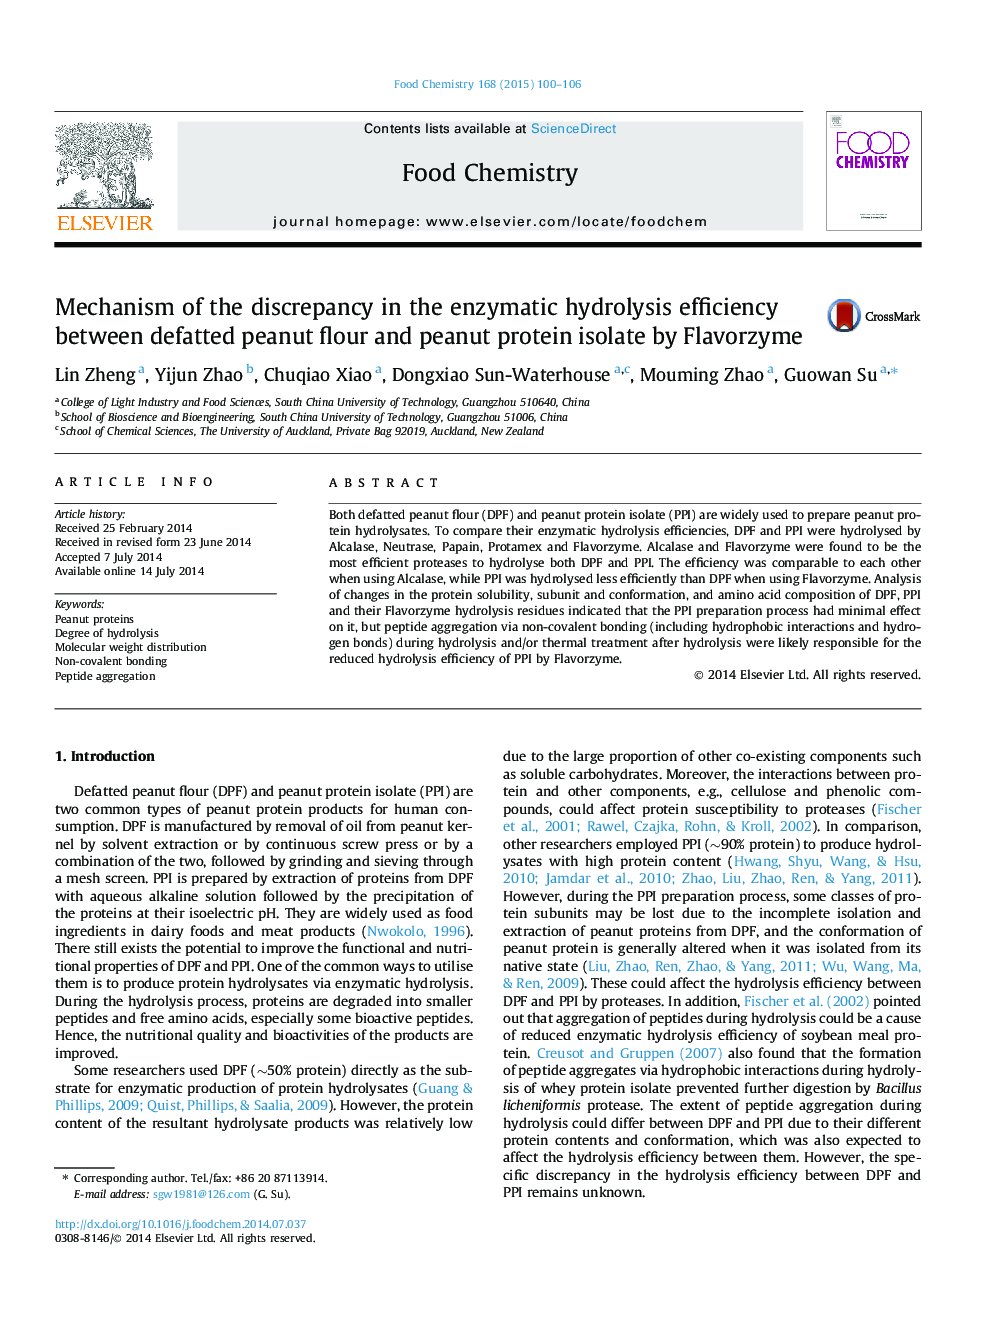 Mechanism of the discrepancy in the enzymatic hydrolysis efficiency between defatted peanut flour and peanut protein isolate by Flavorzyme